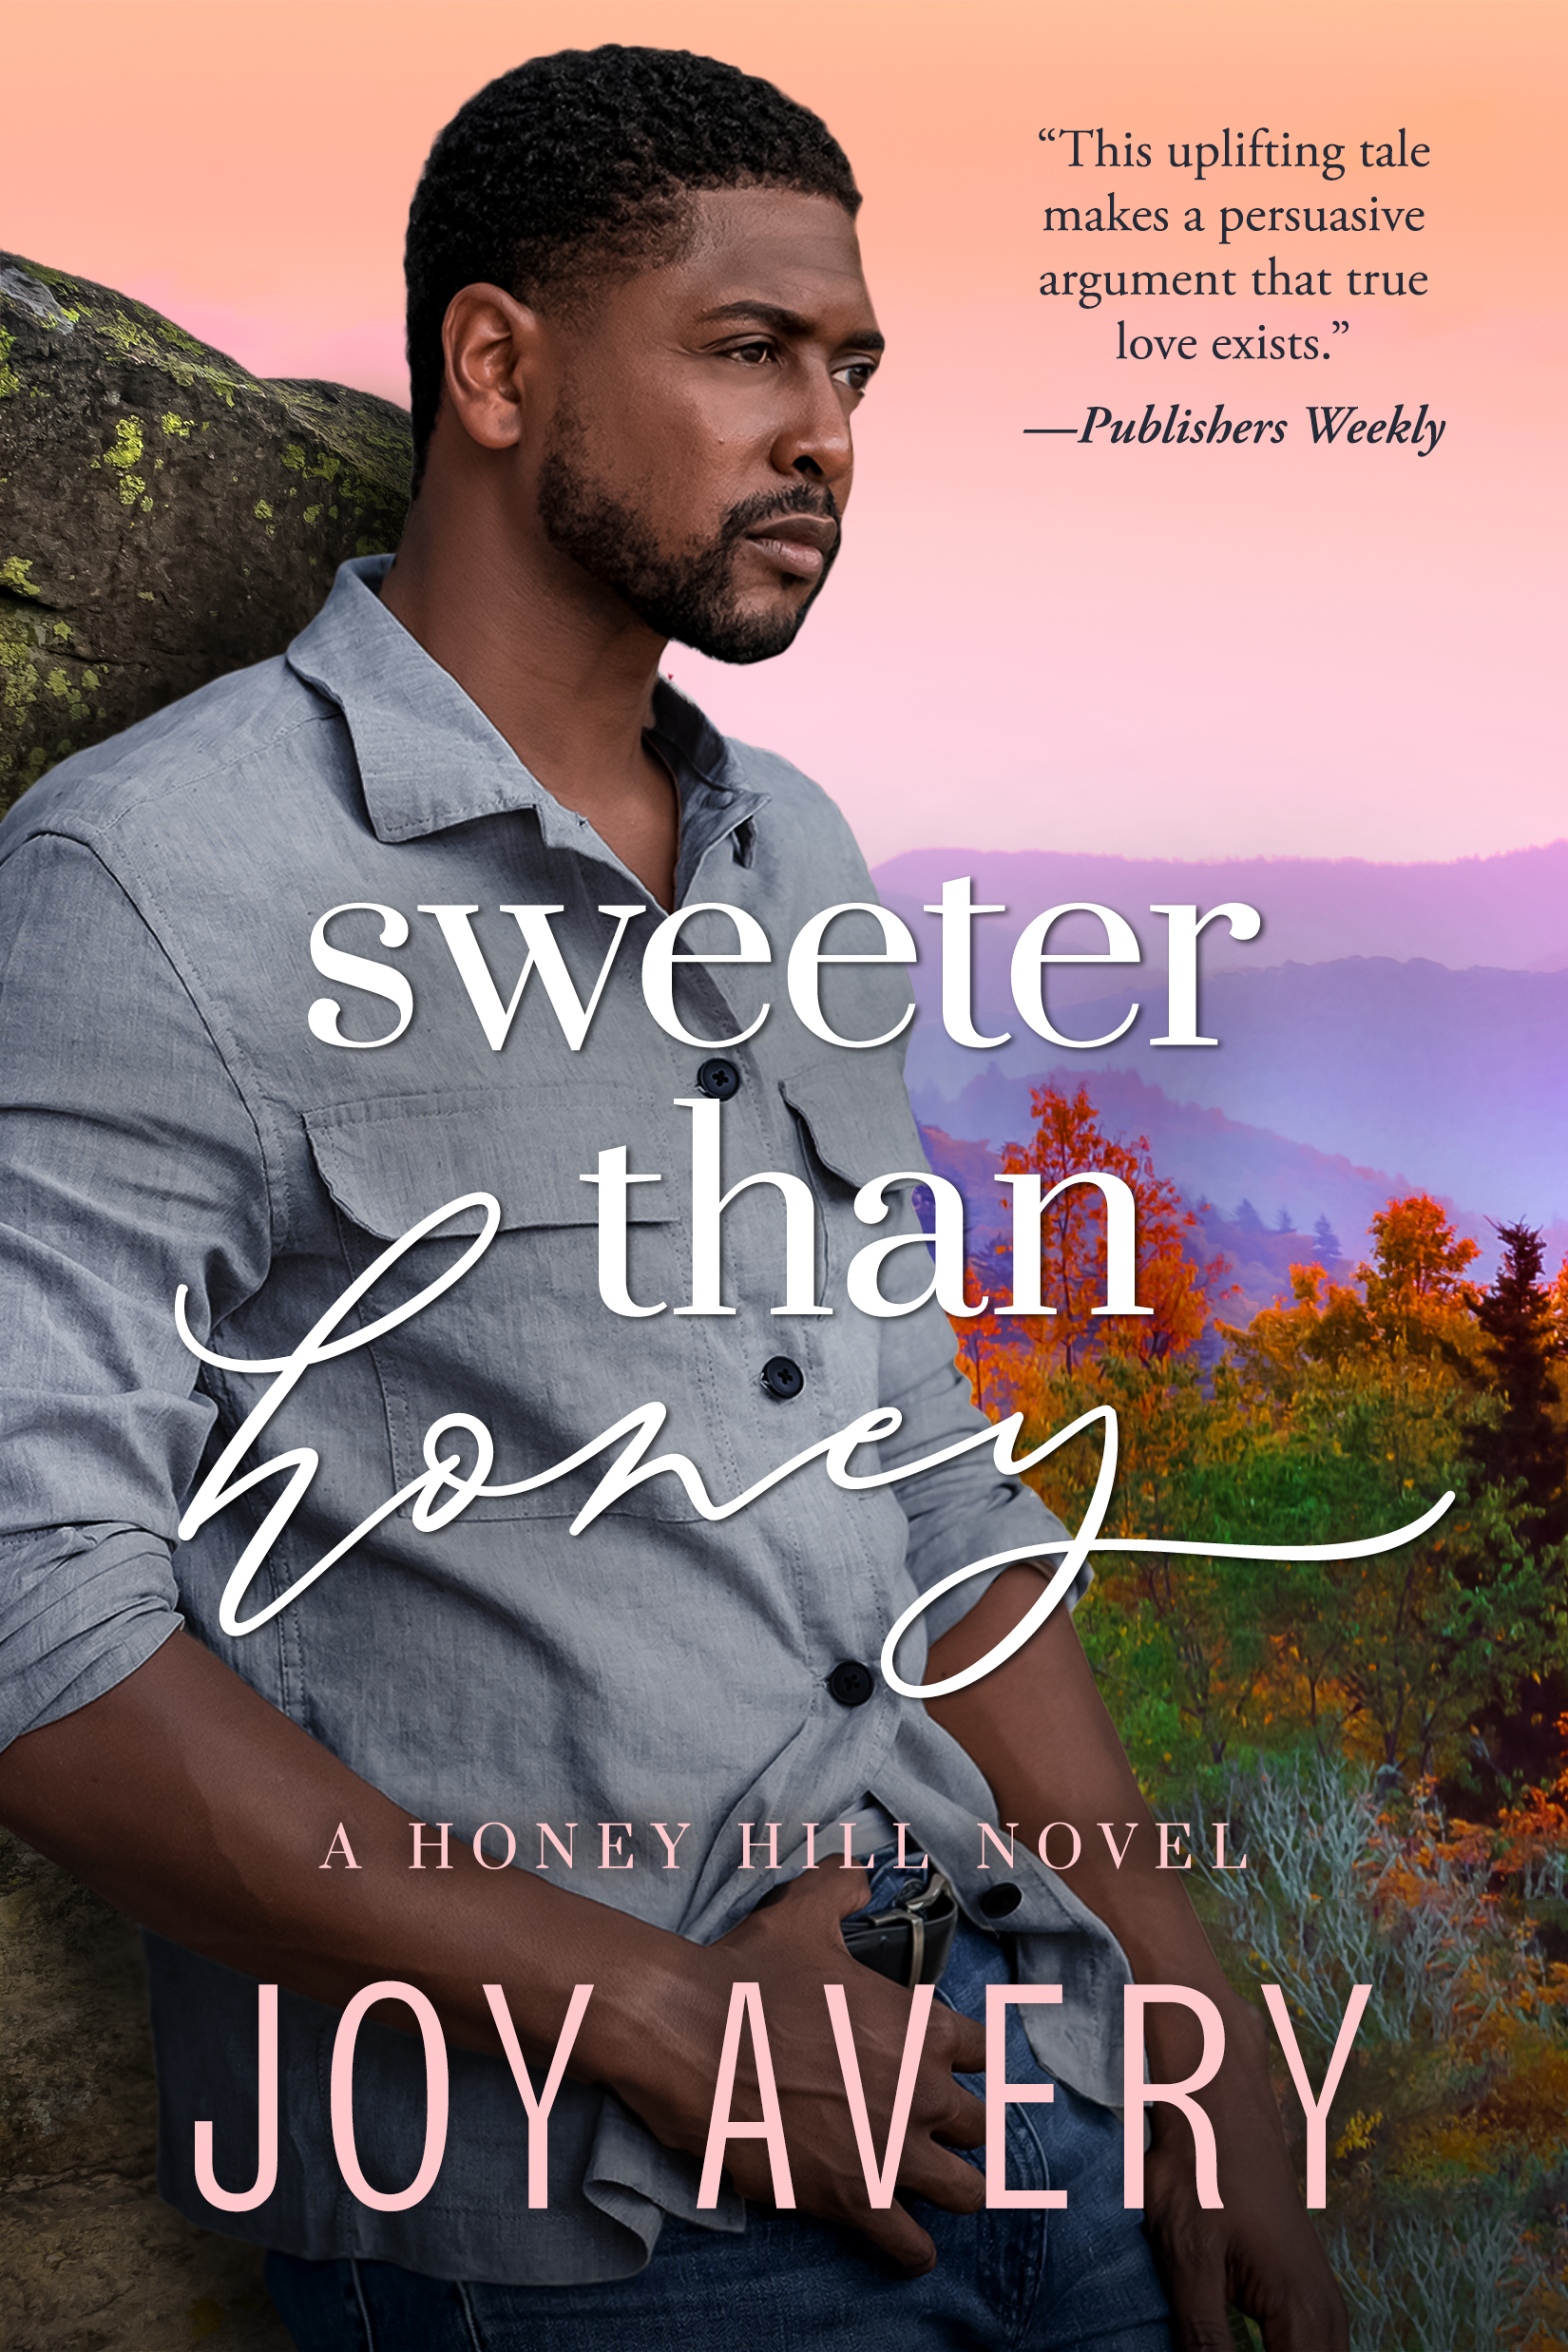 book cover: sweeter than honey by joy avery